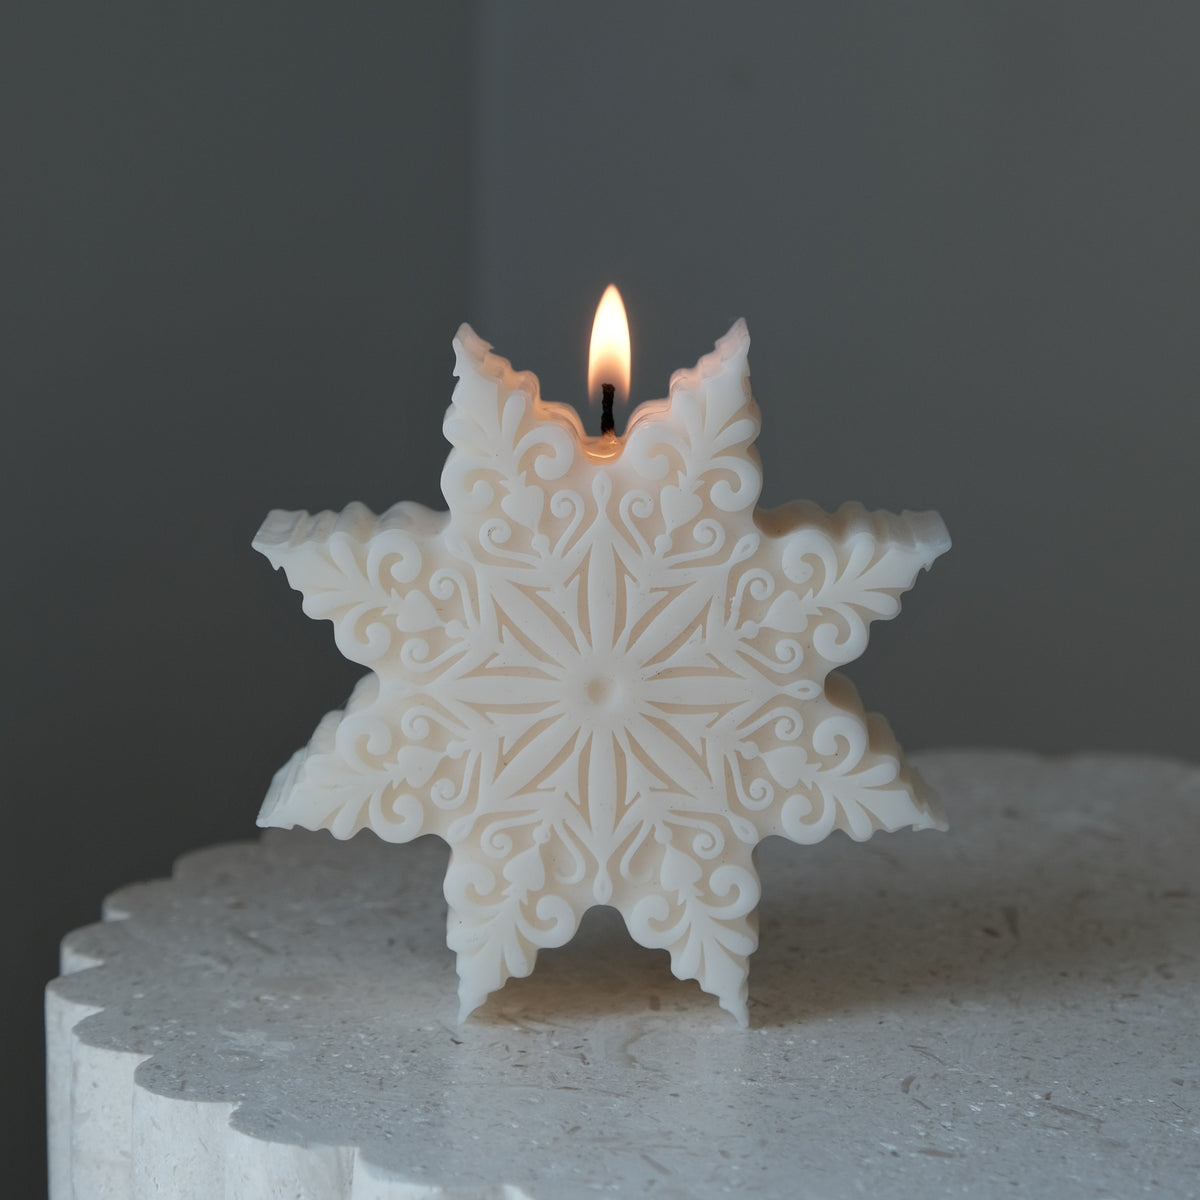 1pc, Snowflake Candle Mold, Christmas Snowflake Candle Mold, Silicone  Candle Mold, Candle Mold For Soy Wax, Aromatherapy Candle Making, Soap Mold